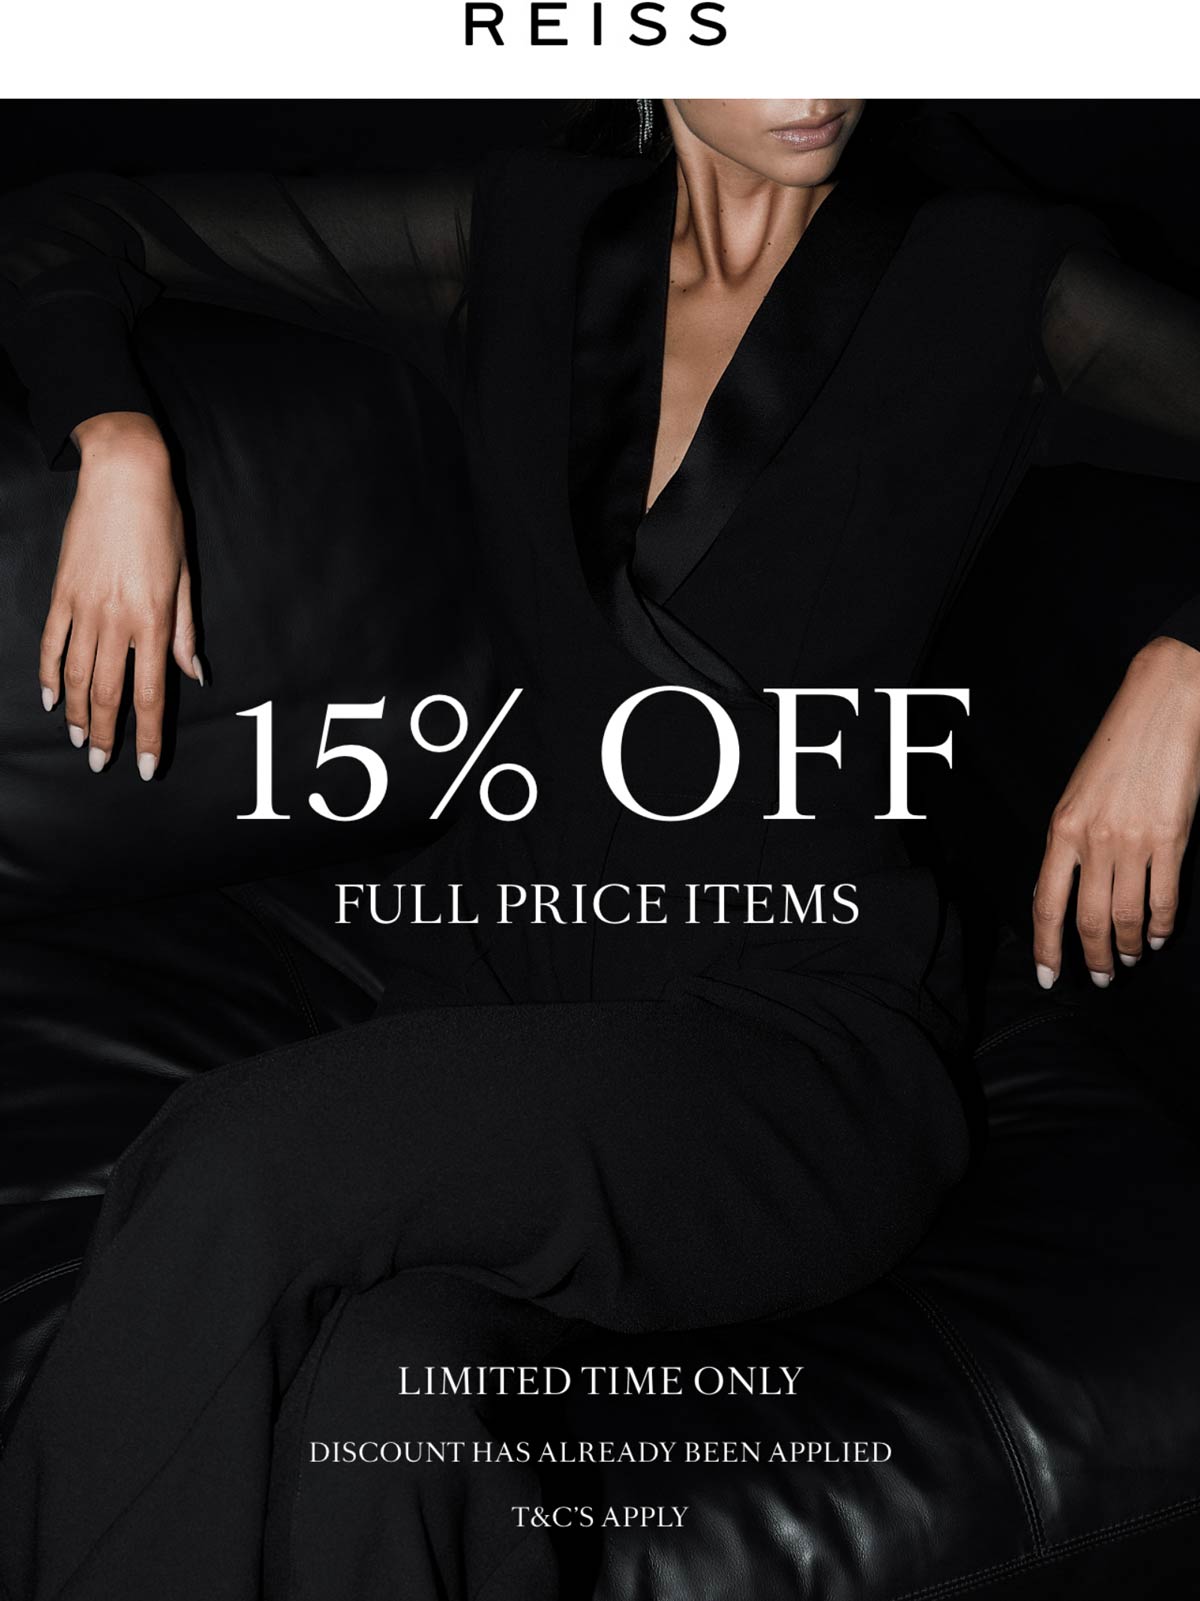 REISS coupons & promo code for [November 2022]